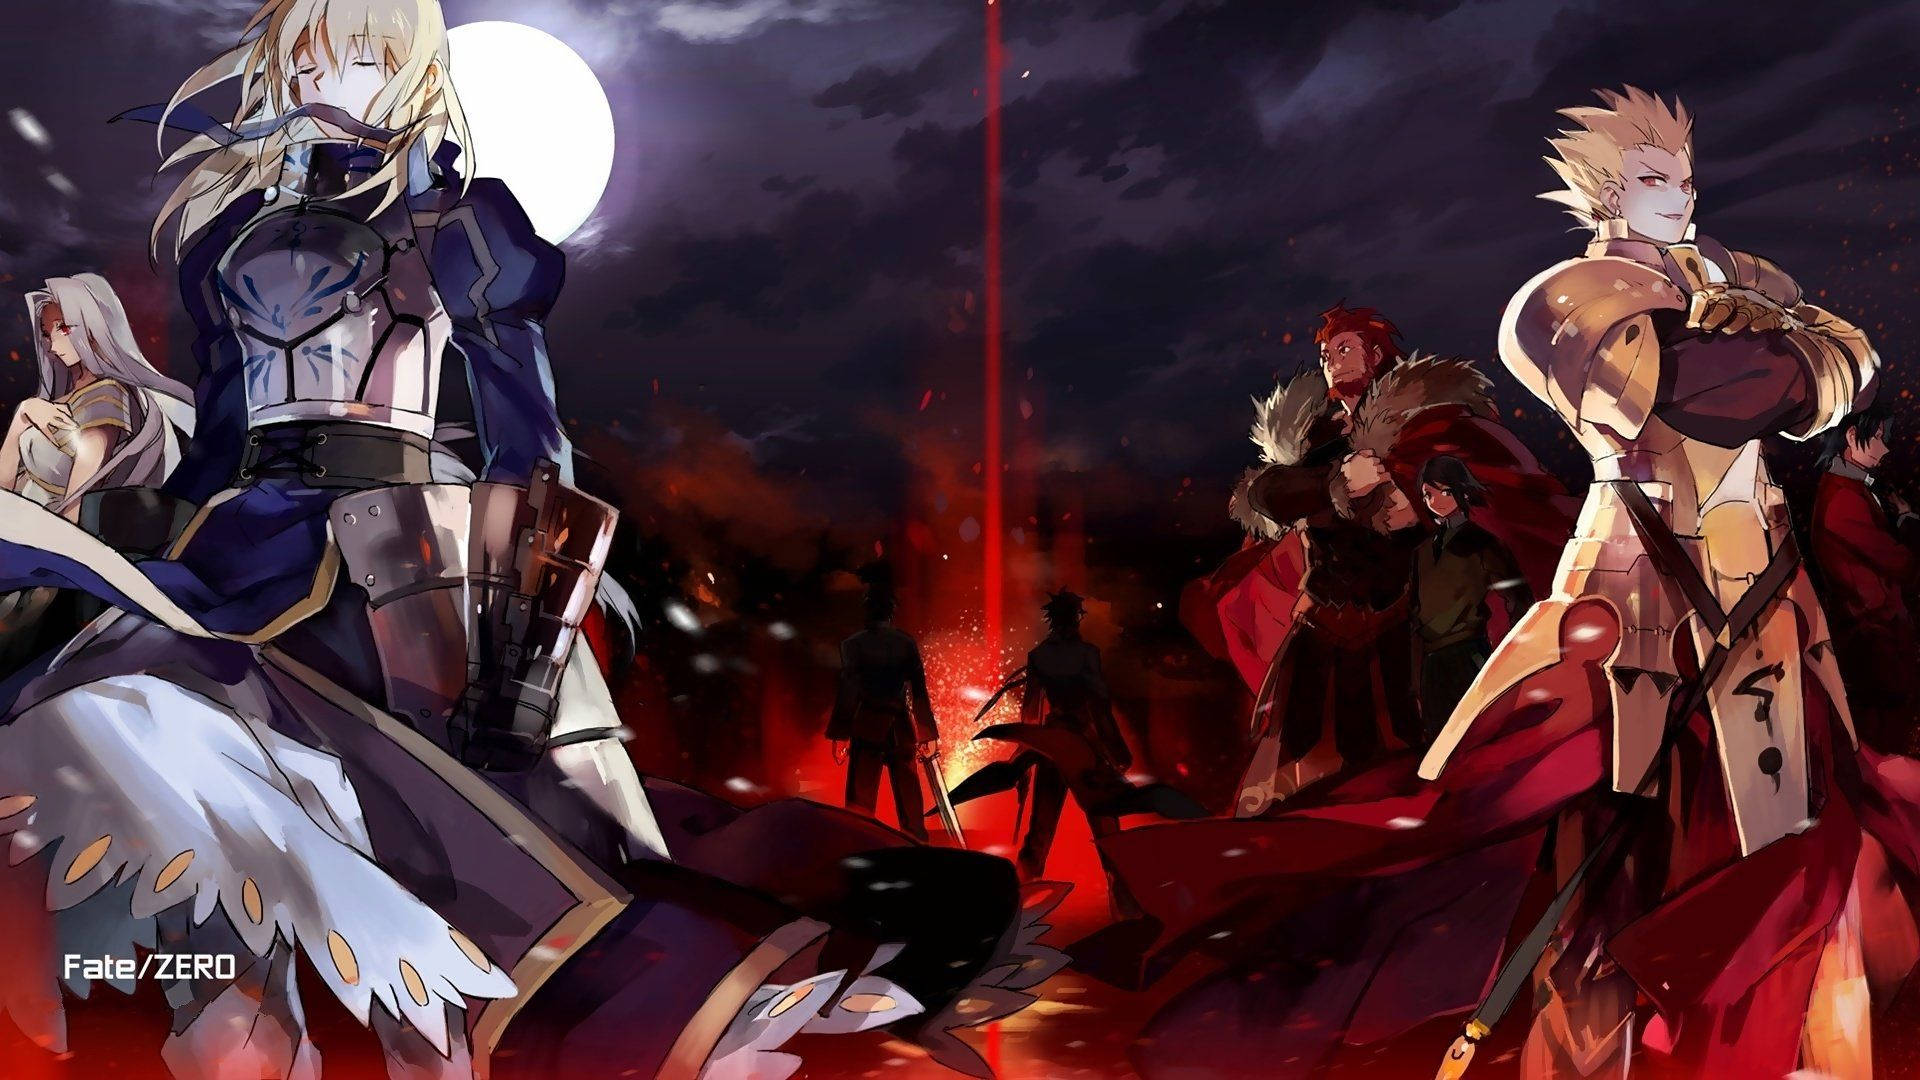 Prepare to embark on an epic journey of courage, sacrifice and destiny - Fate Zero Wallpaper